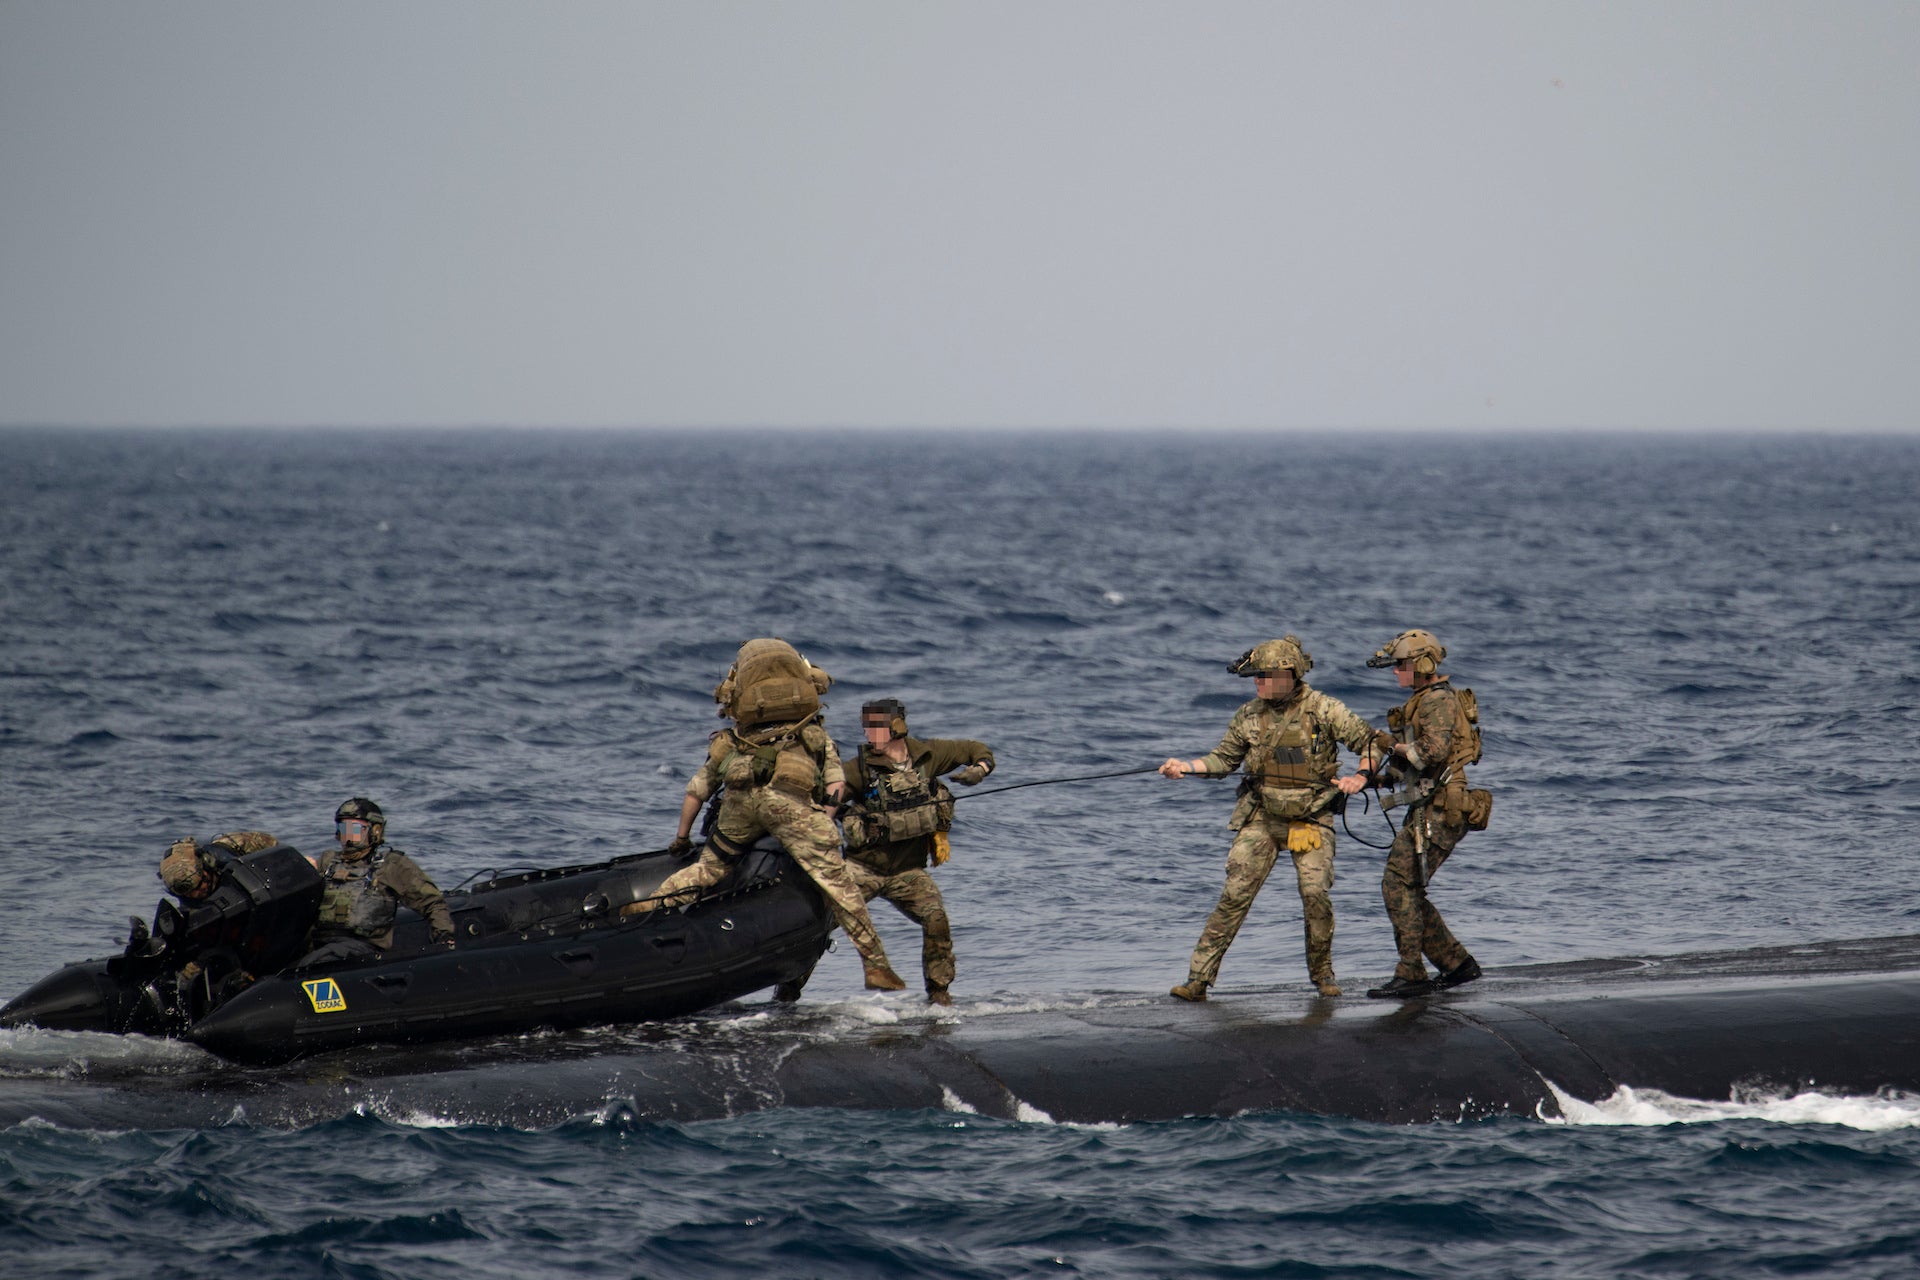 MEDITERRANEAN SEA (Feb. 27, 2023) East-Coast-based U.S. Naval Special Warfare Operators (SEALs) and NATO special operations forces partners land a combatant rubber raiding craft (CRRC) aboard Ohio-class guided-missile submarine USS Florida (SSGN 728) during a special operations forces interoperability exercise, Feb. 27, 2023. These  operations demonstrate U.S. European Command’s ability to rapidly deploy Special Operations Forces throughout the theater at a time and place of our choosing, and the U.S. commitment to train with Allies and partners to deploy and fight as multinational forces and SOF to meet today’s challenges. (U.S. Navy photo by Mass Communications Specialist 2nd Class Matthew Dickinson)